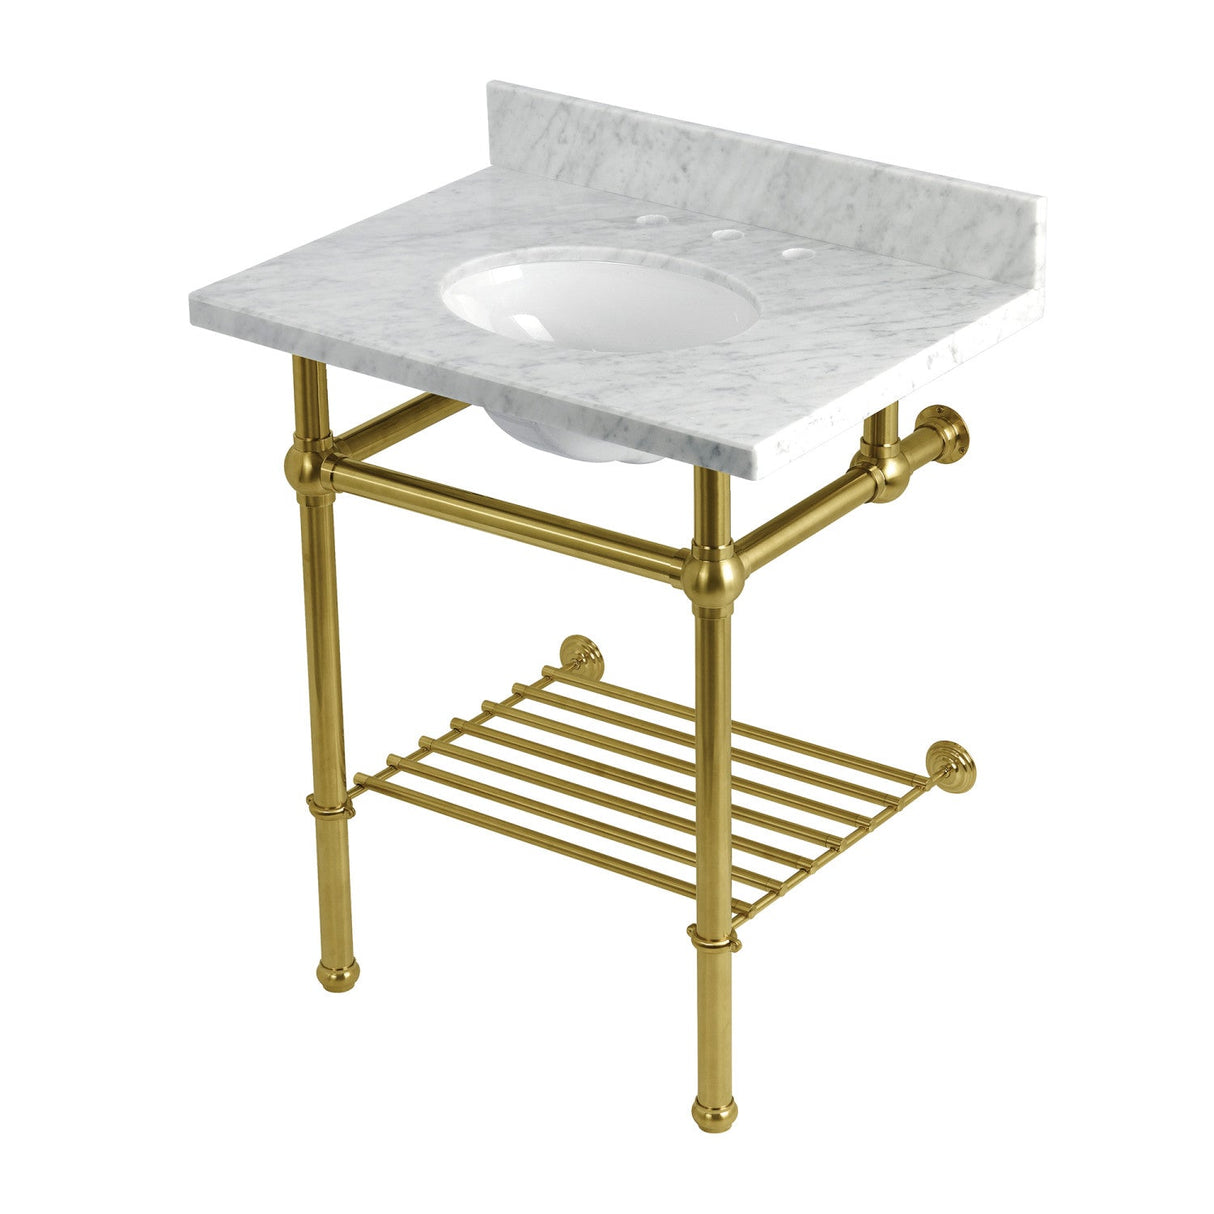 Templeton KVPB30MBB7 30-Inch Console Sink with Brass Legs (8-Inch, 3 Hole), Carrara Marble/Brushed Brass